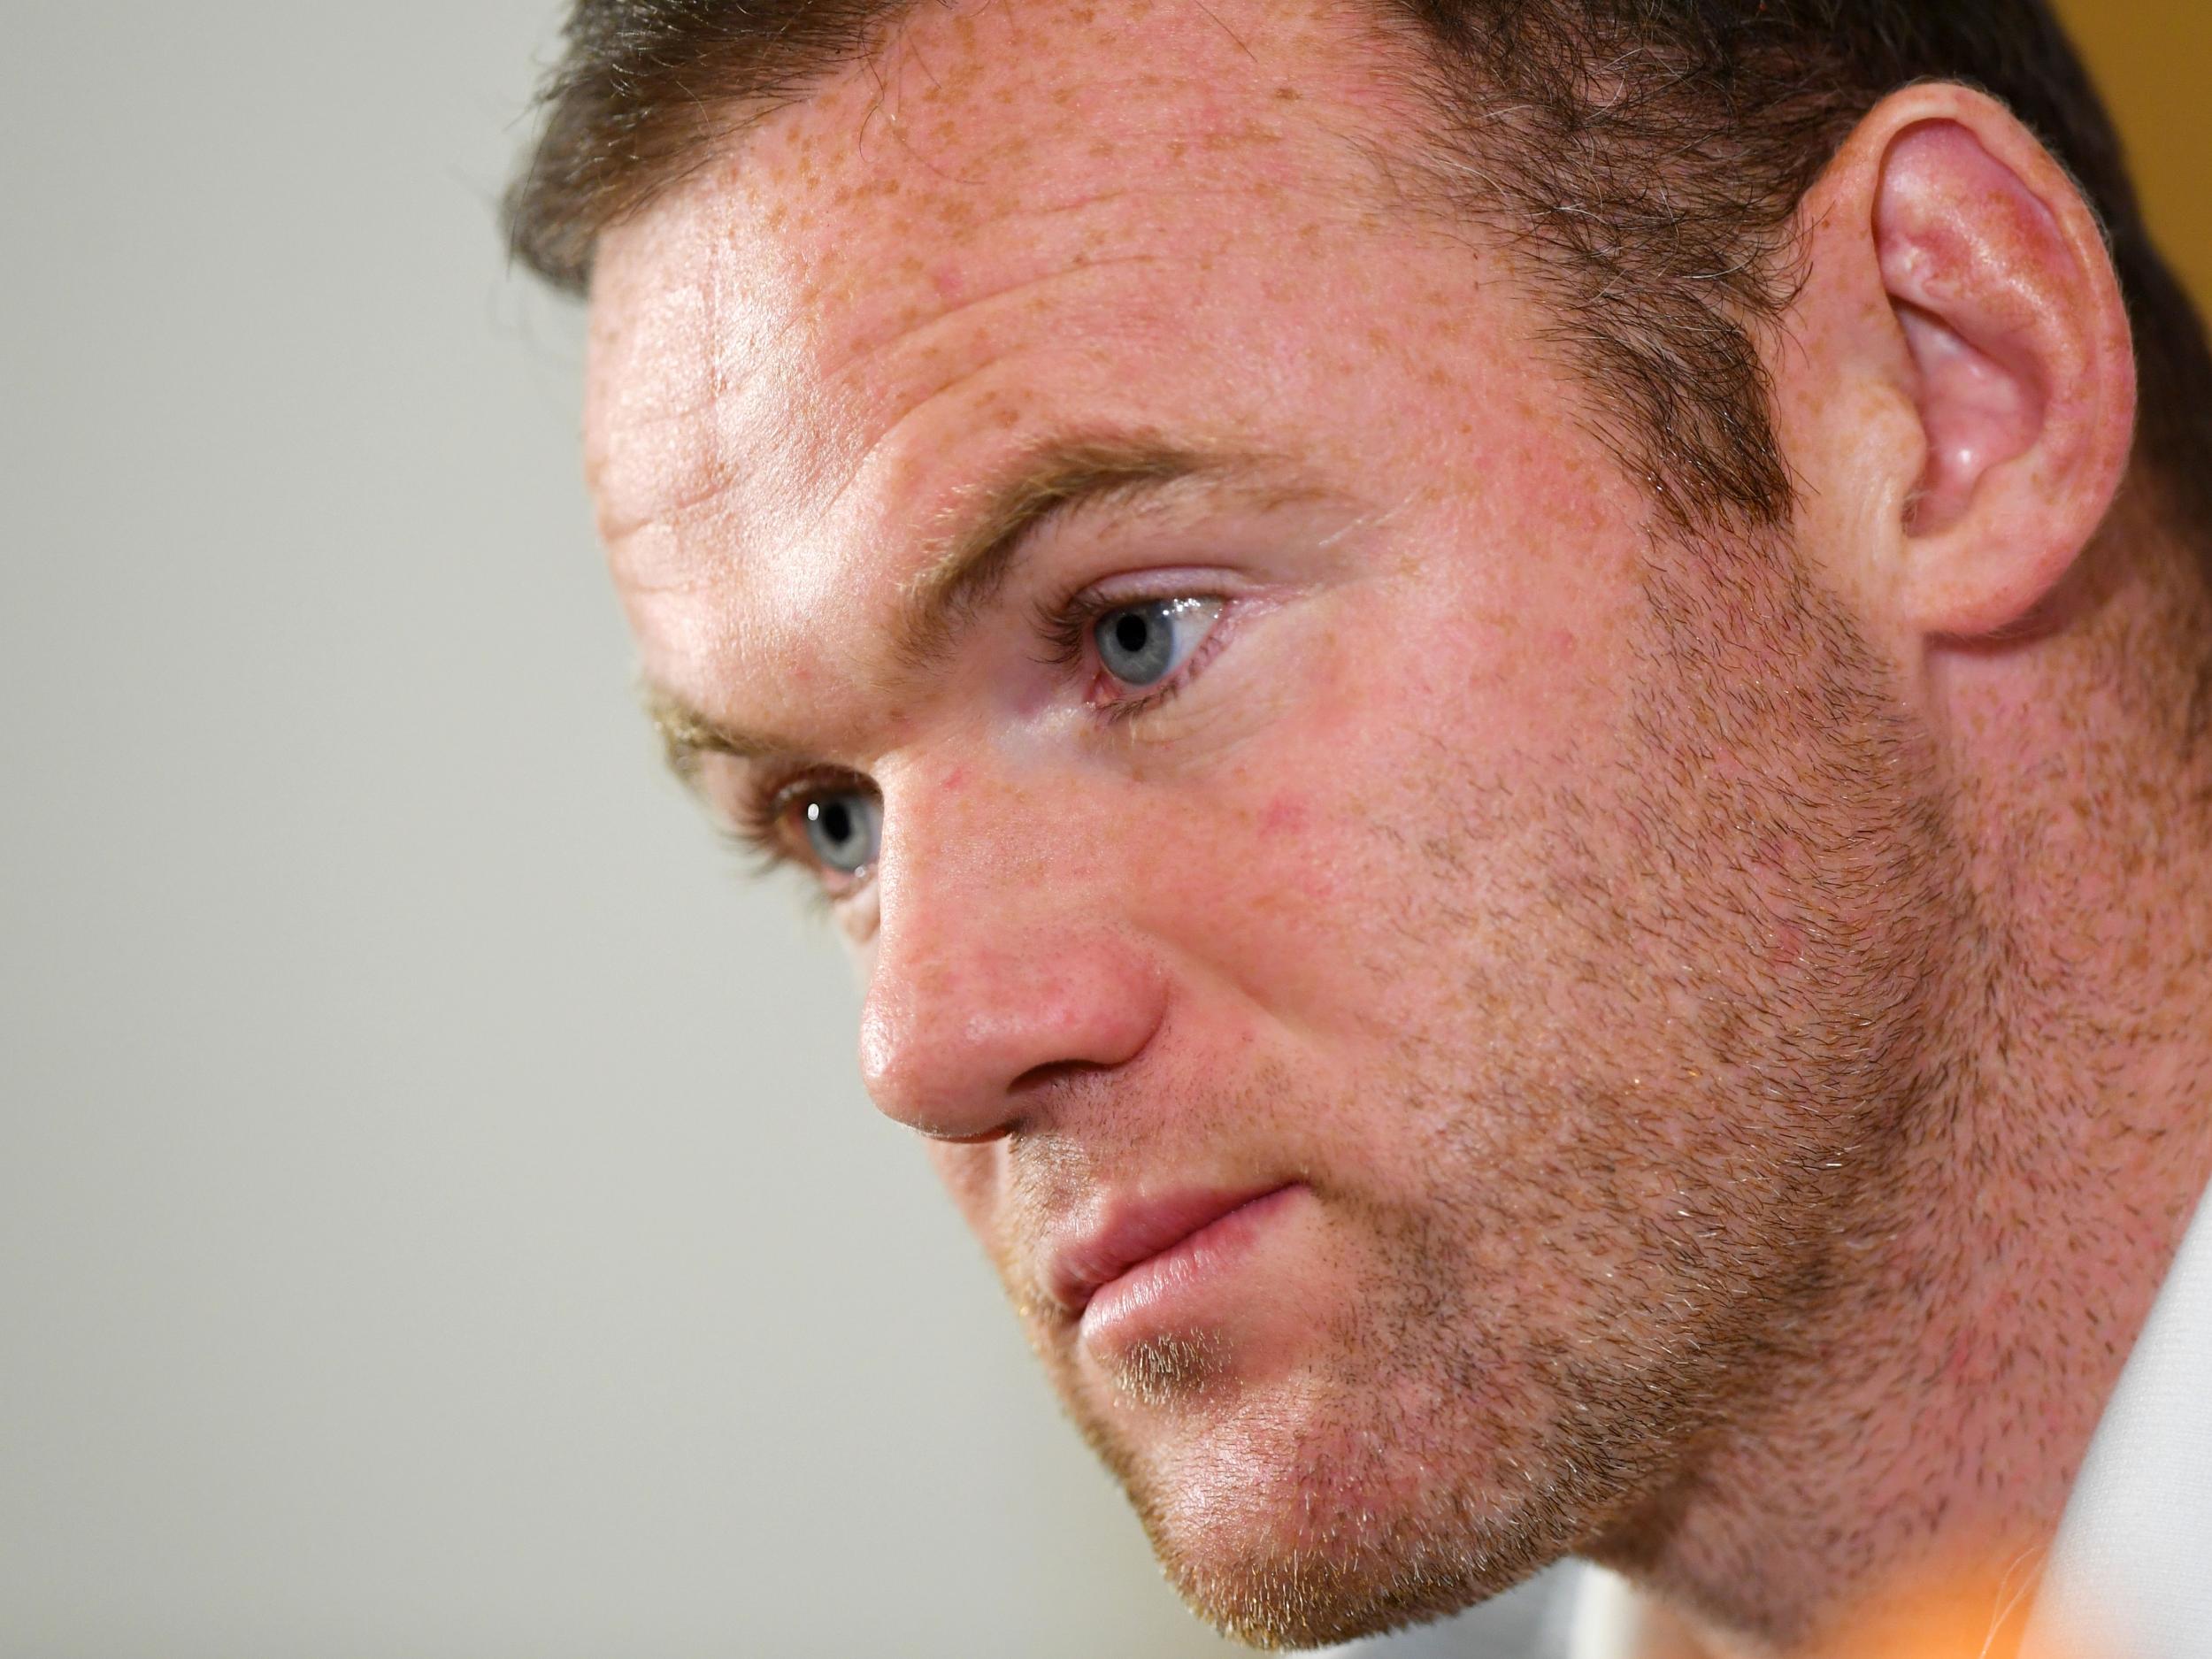 Wayne Rooney Q&A: England captain gives the most frank and revealing interview of his career